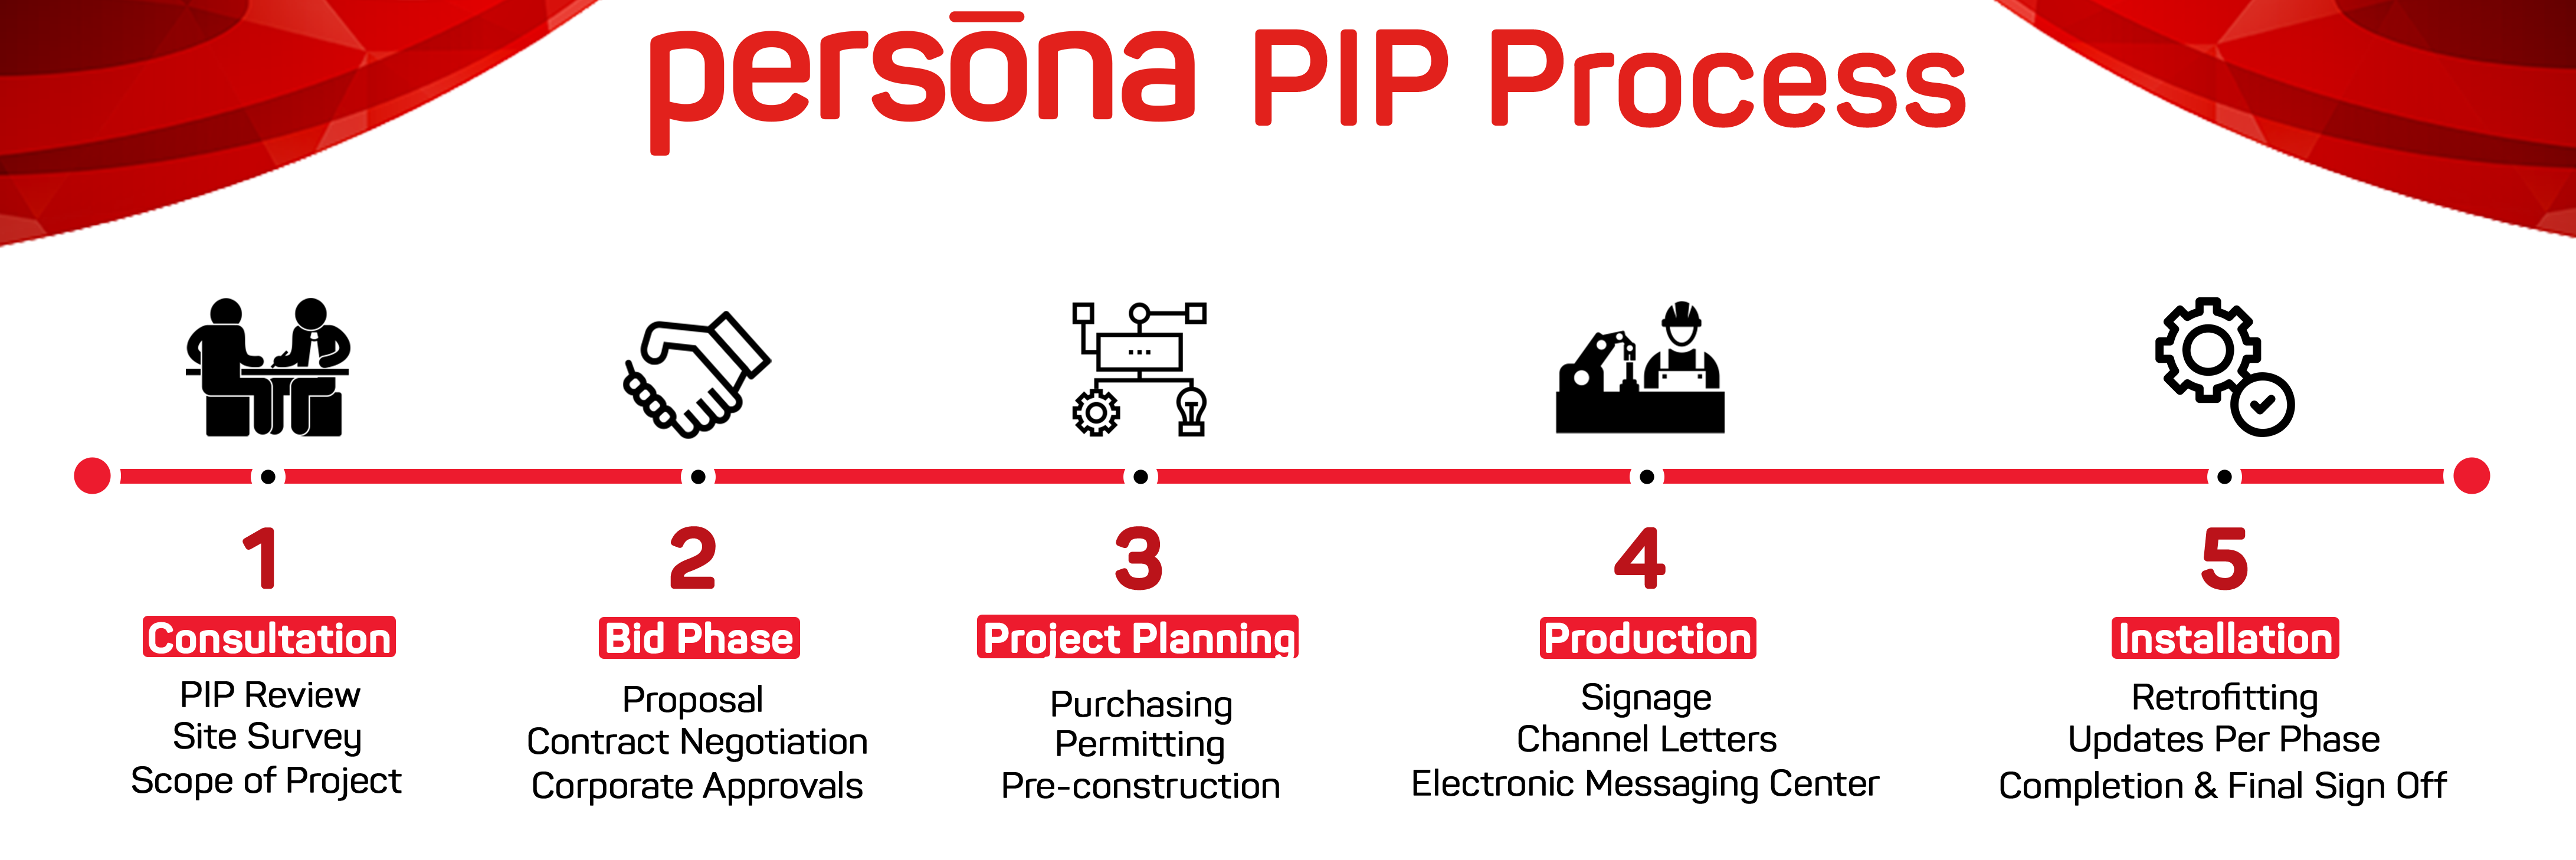 pip process brand guidelines